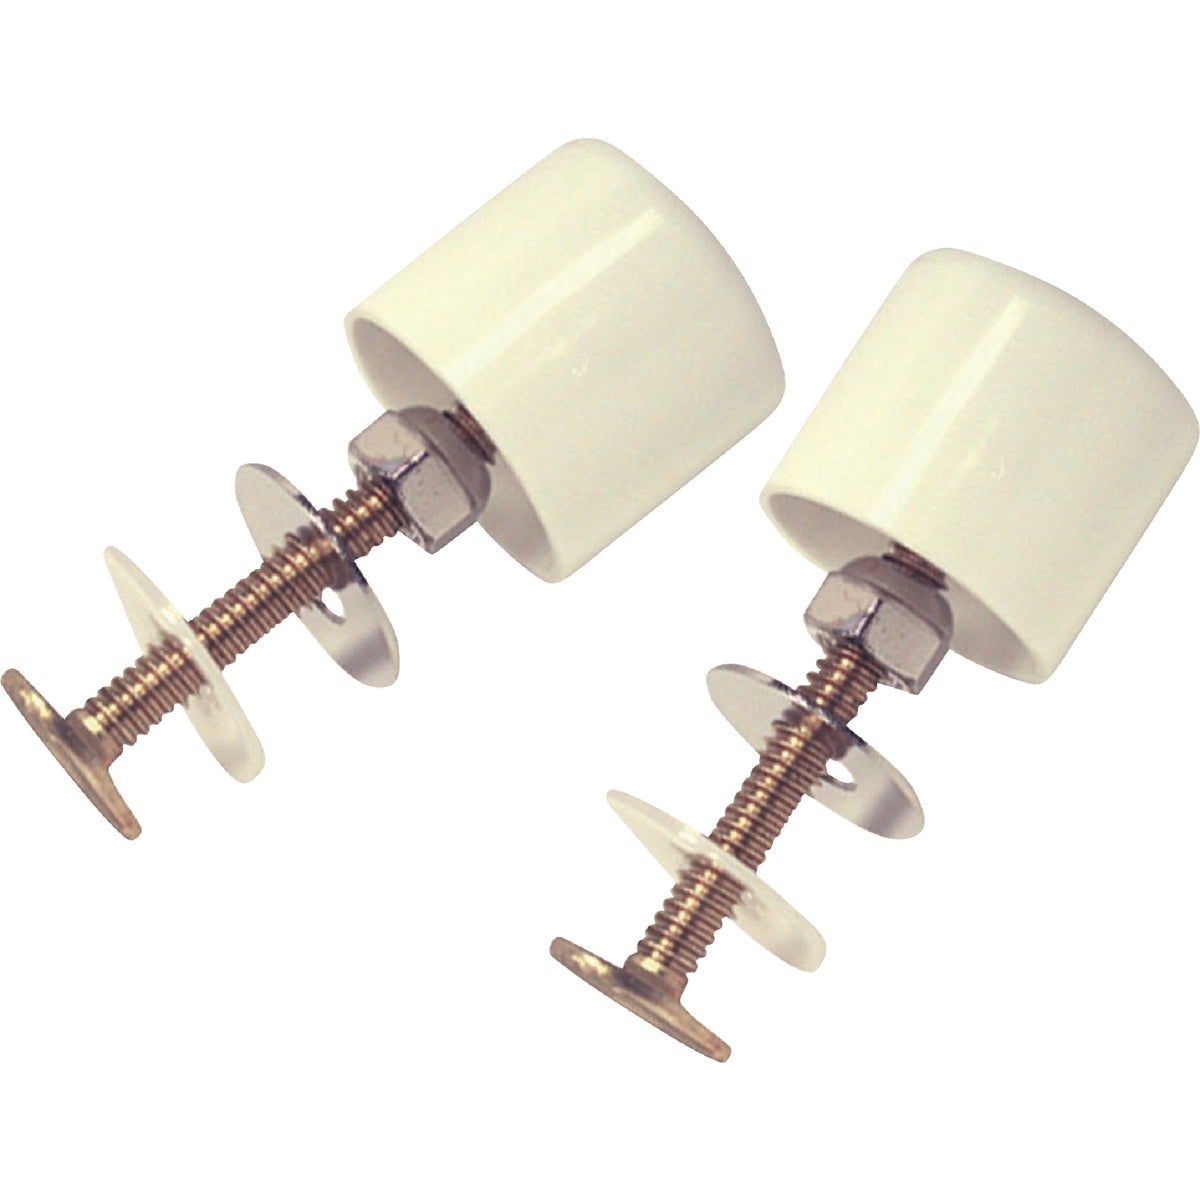 Item 456768, Danco 1/4" toilet bolts with screw-on caps.